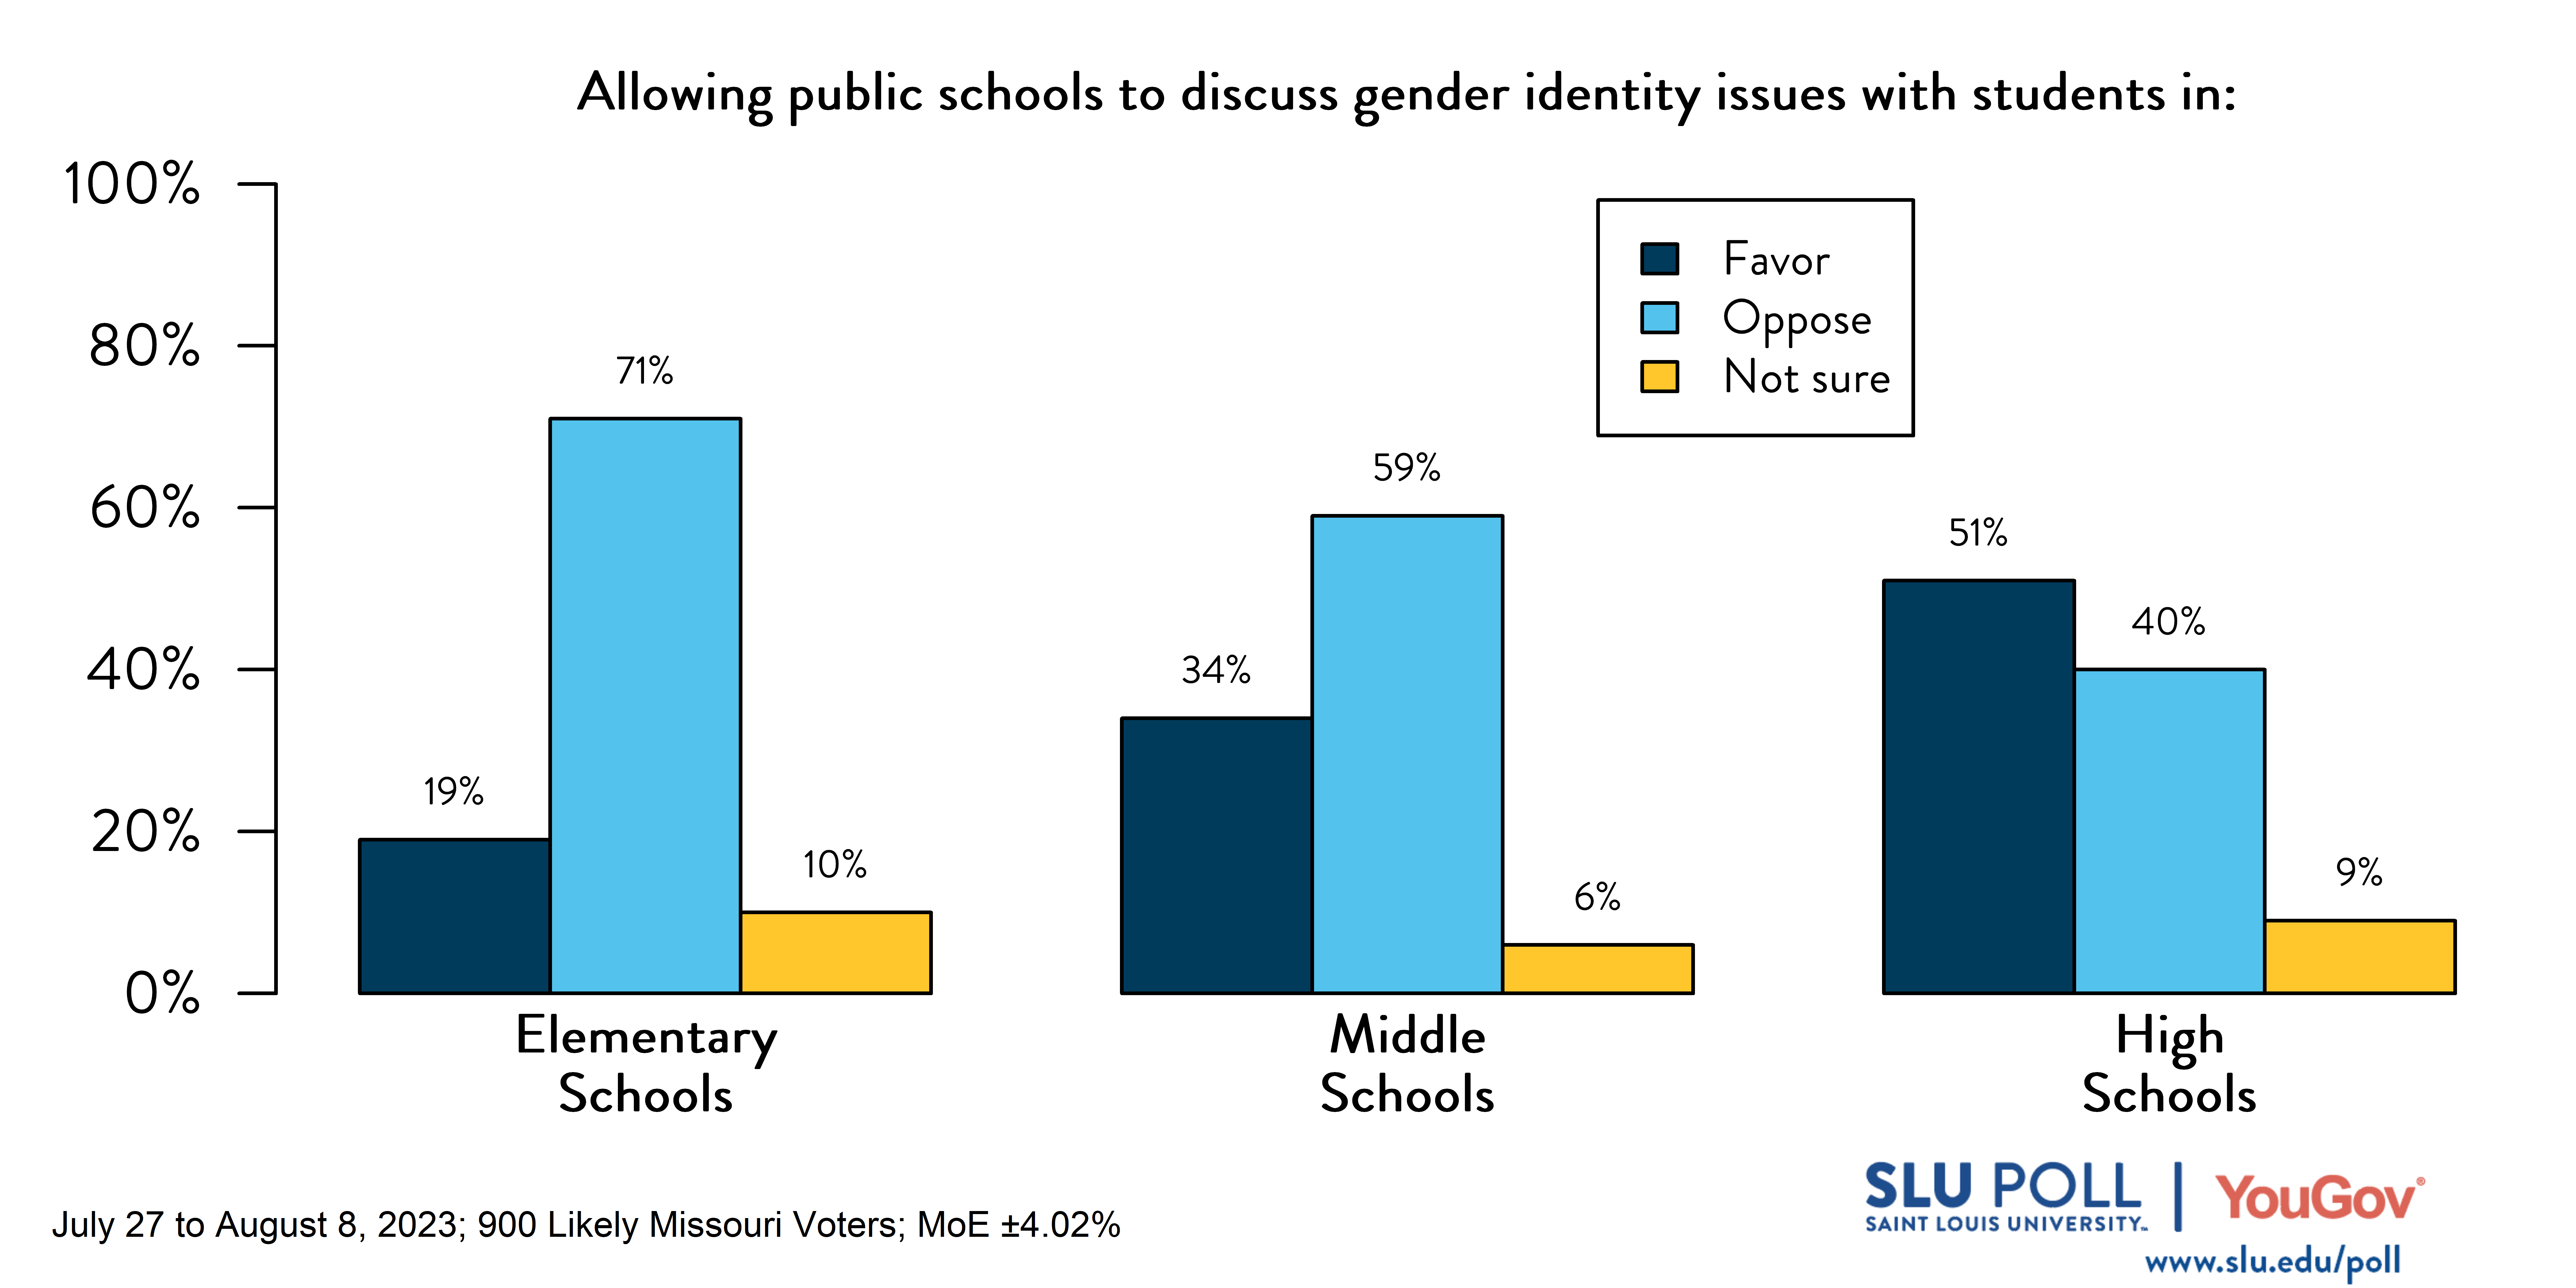 Likely voters’ responses to ‘Do you favor or oppose public schools being allowed to: discuss gender identity issues with students in elementary schools?’: 19% Favor, 71% Oppose, and 10% Not Sure. Likely voters’ responses to ‘Do you favor or oppose public schools being allowed to: discuss gender identity issues with students in middle schools?’: 34% Favor, 59% Oppose, and 6% Not Sure. Likely voters’ responses to ‘Do you favor or oppose public schools being allowed to: discuss gender identity issues with students in high schools?’: 51% Favor, 40% Oppose, and 9% Not Sure.